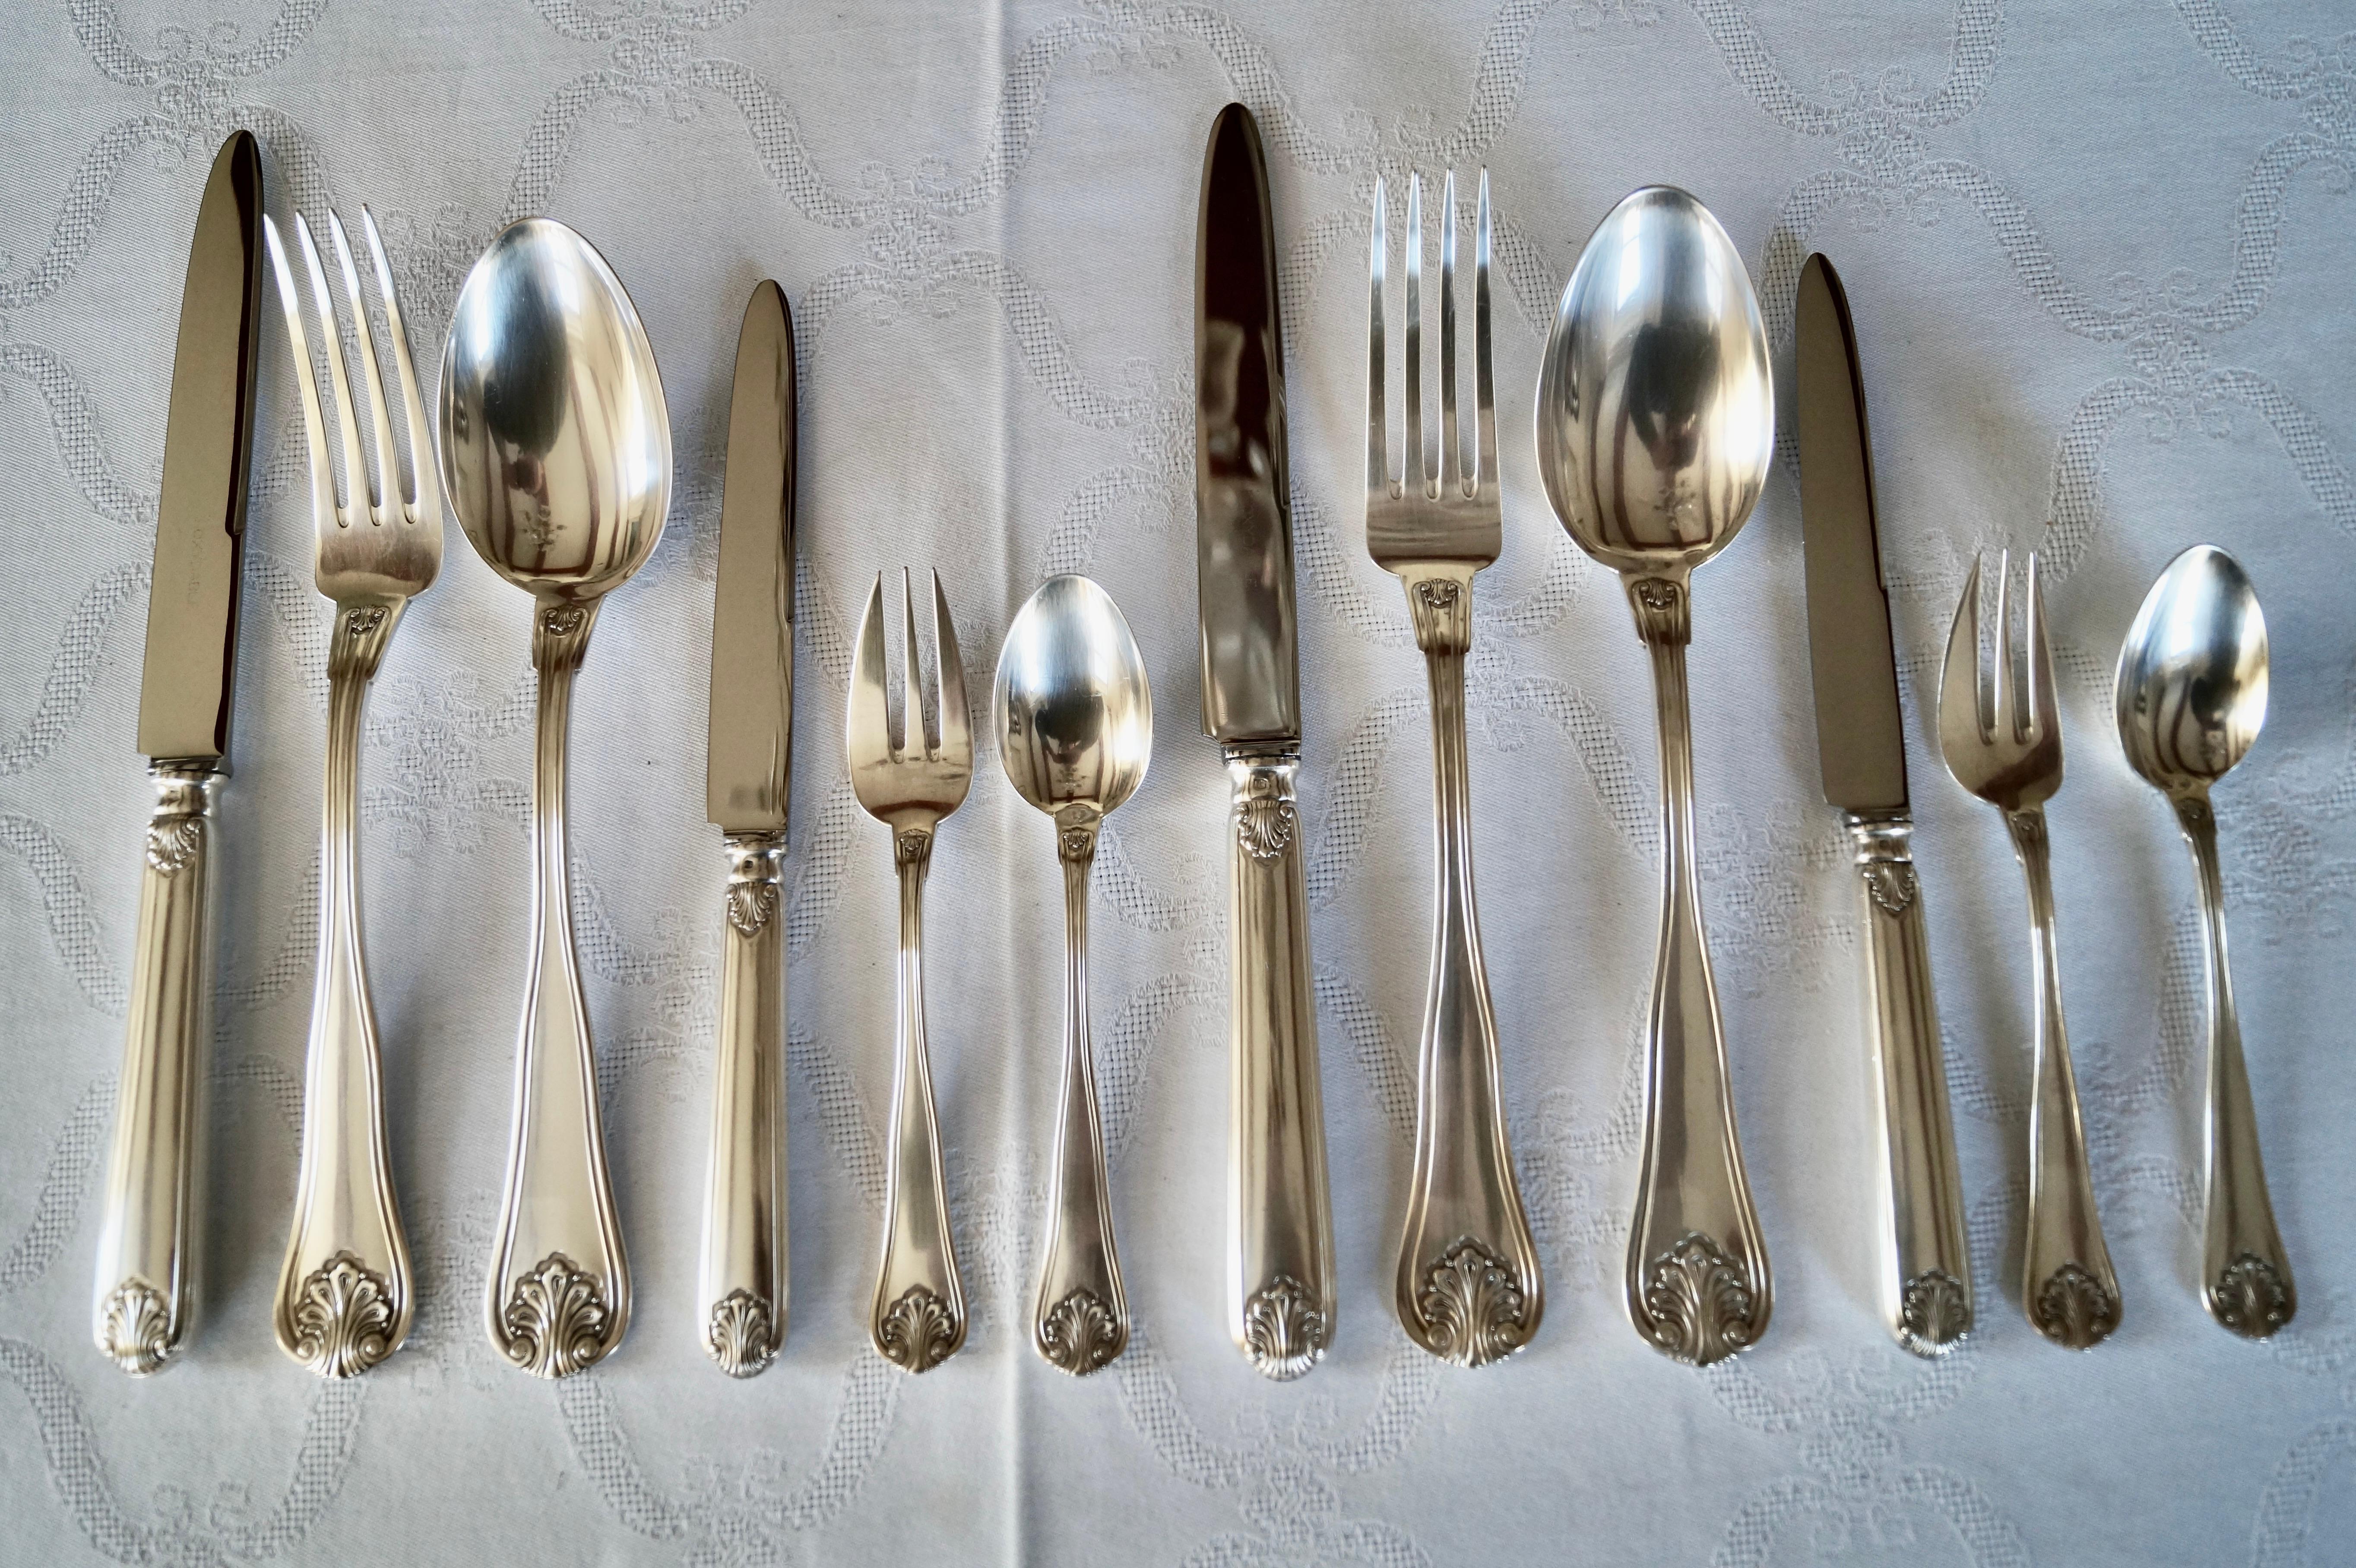 French Provincial Antique Silver Plated ARGENTAL Cutlery flatware set of 146 pieces. France 1920